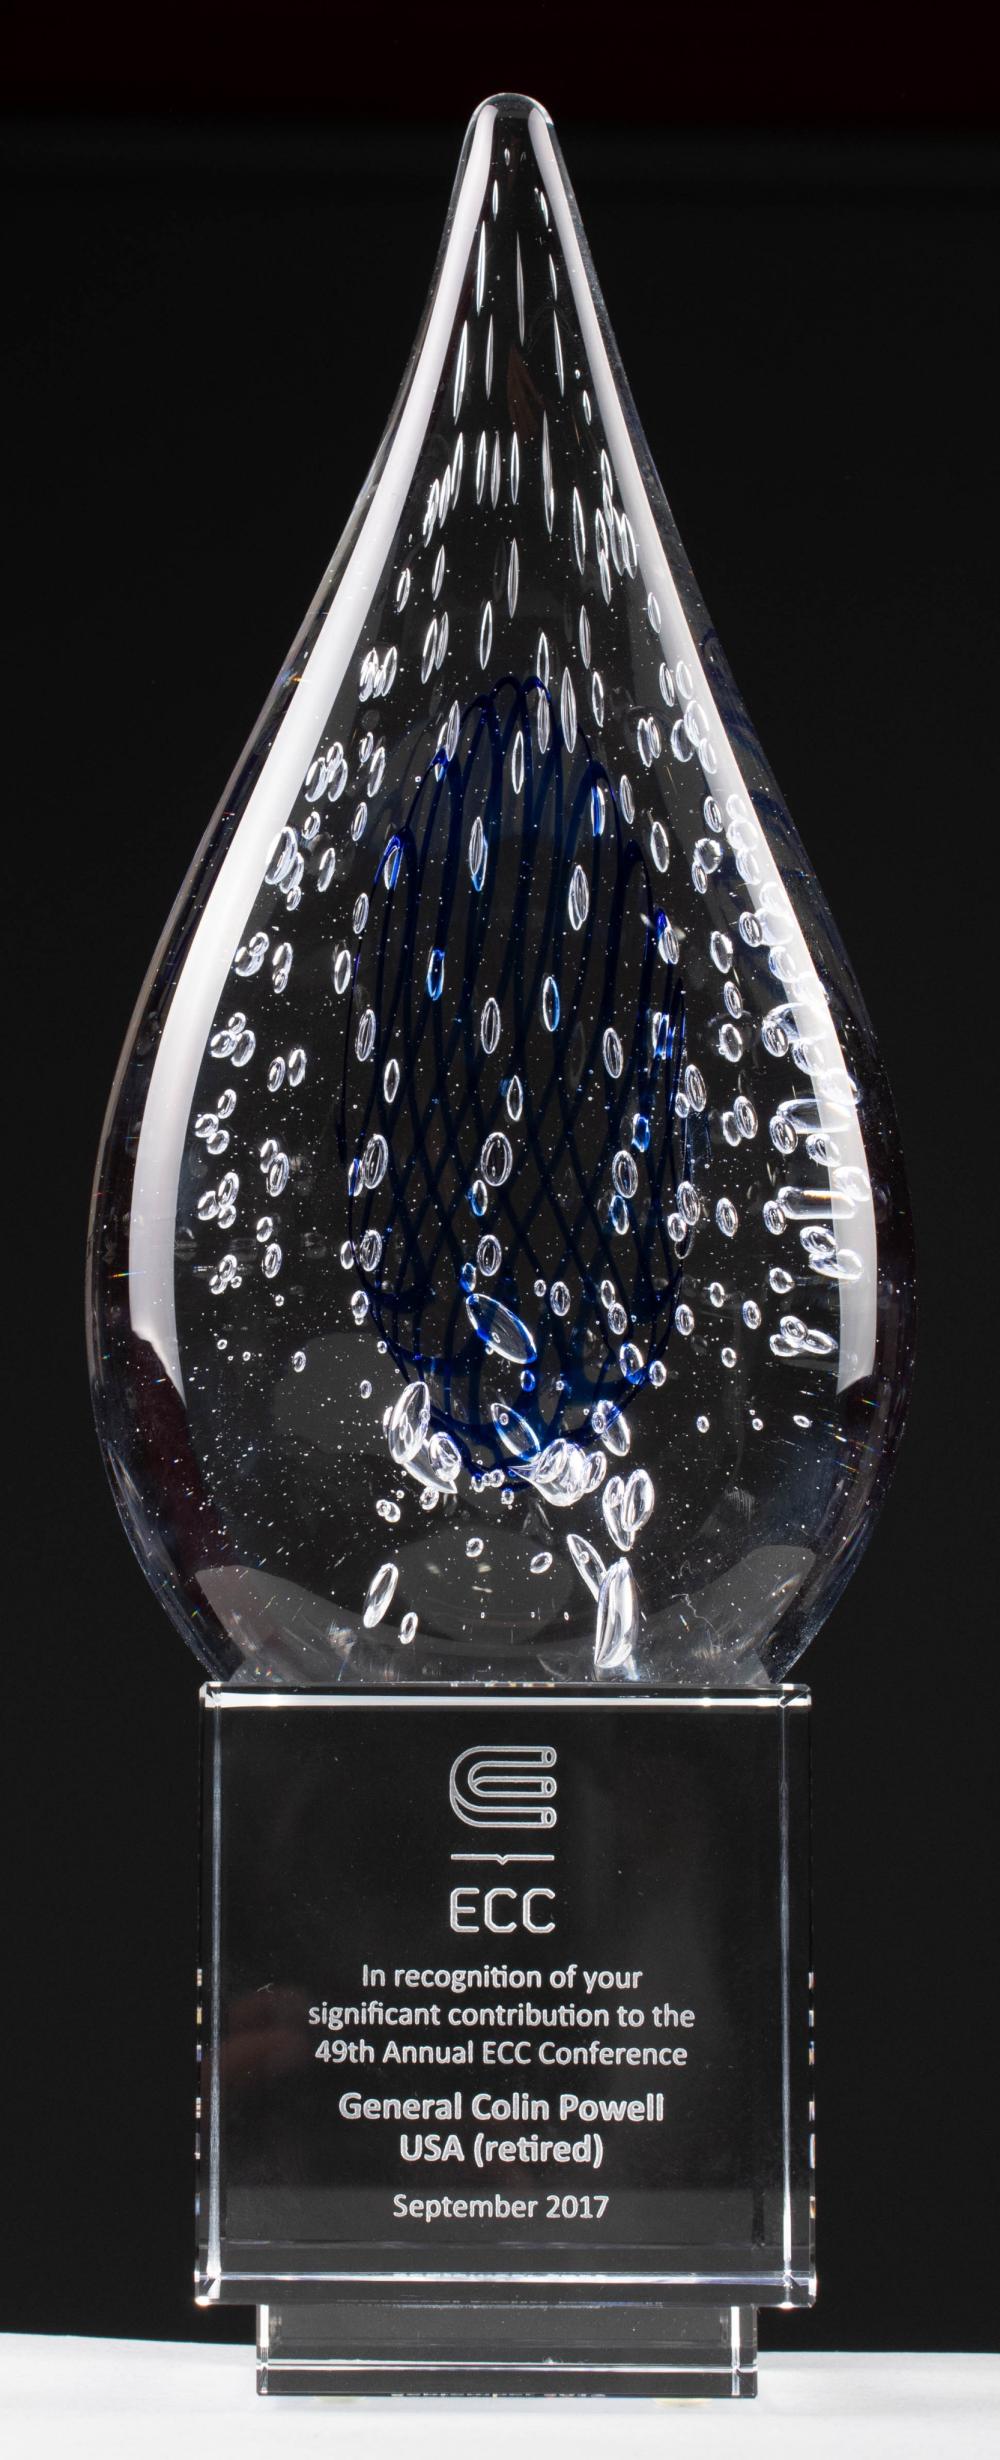 GLASS SCULPTURE GIVEN TO GENERAL